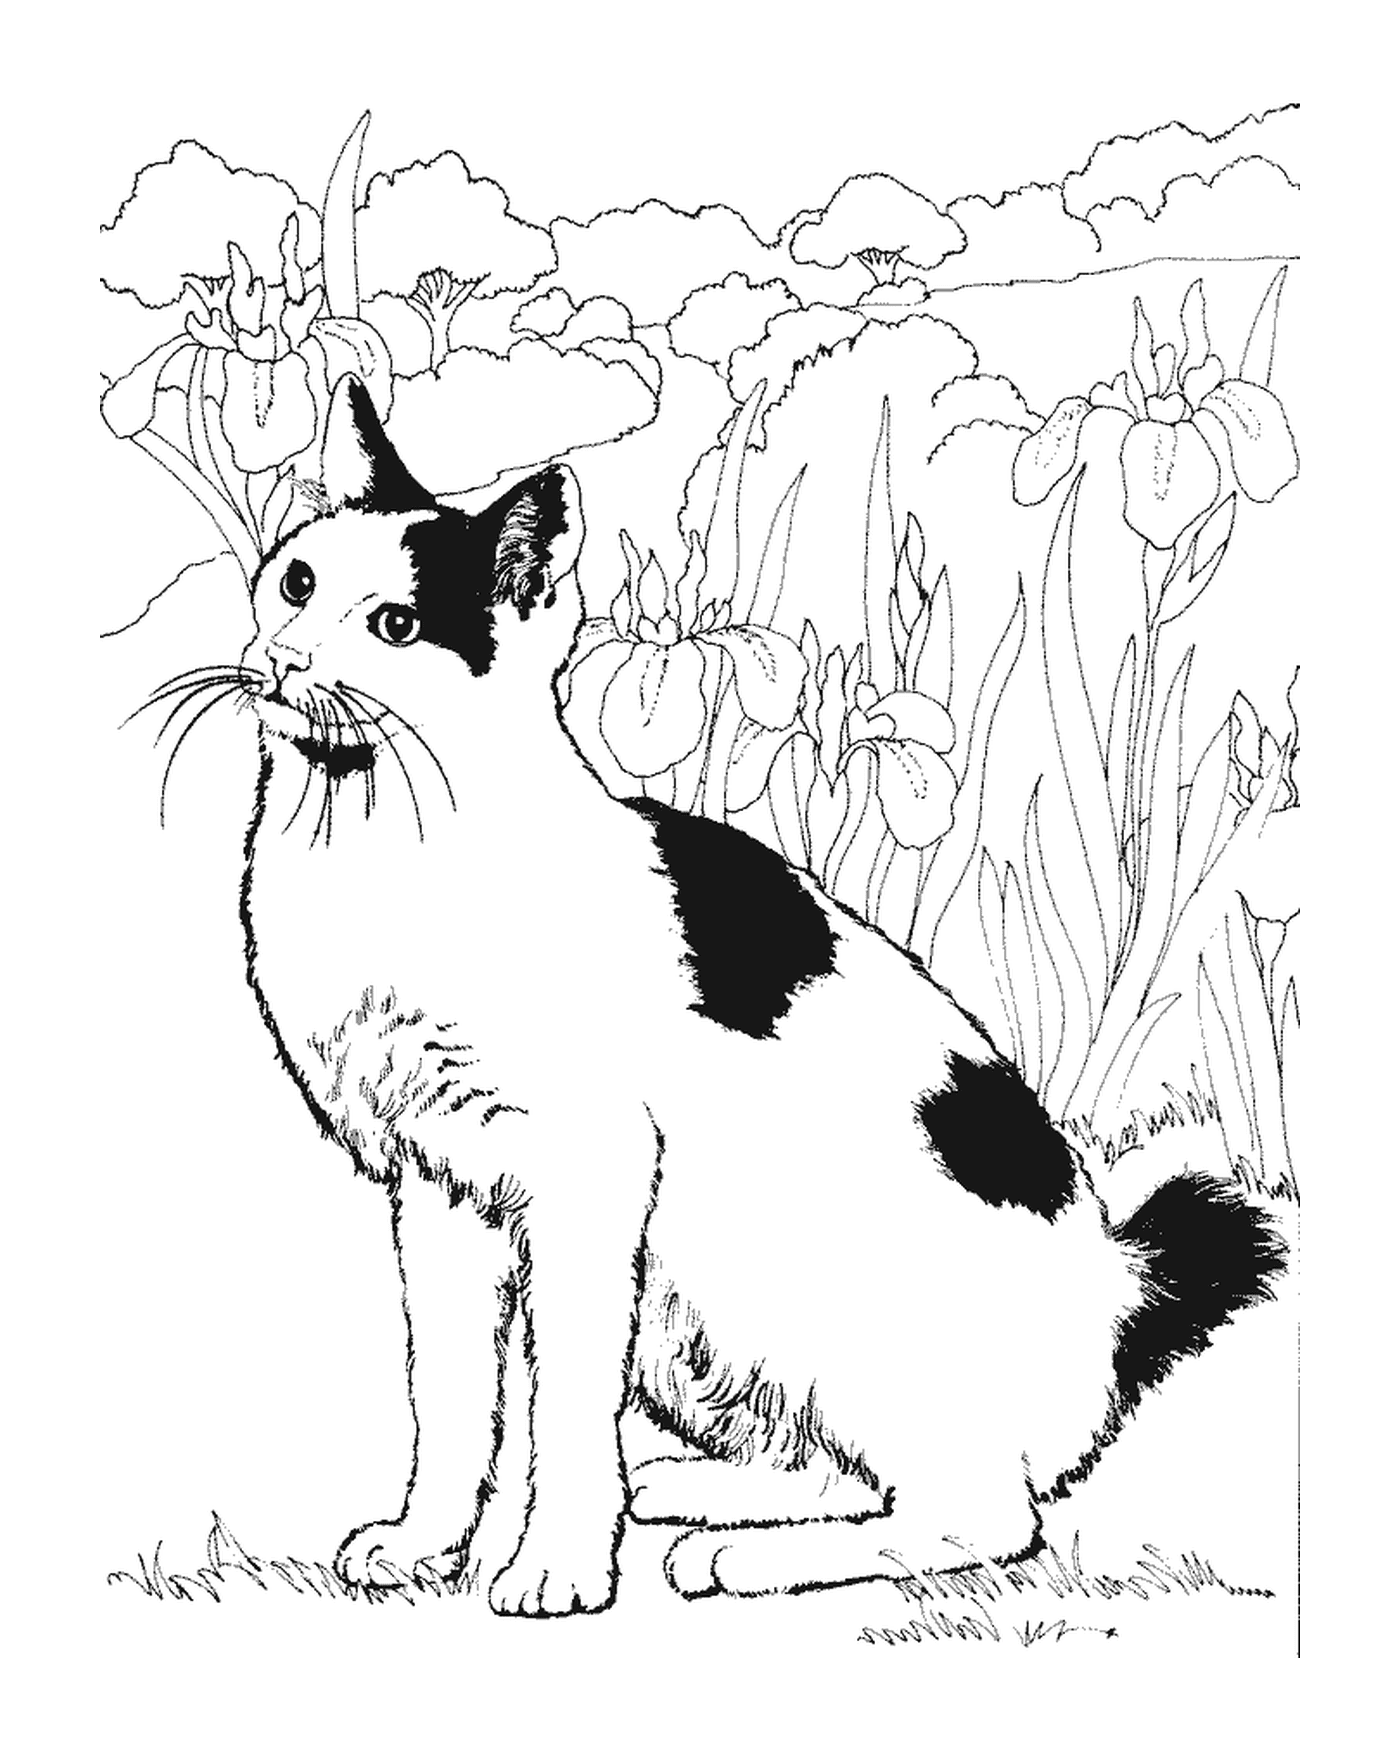  A cat in the garden with flowers 